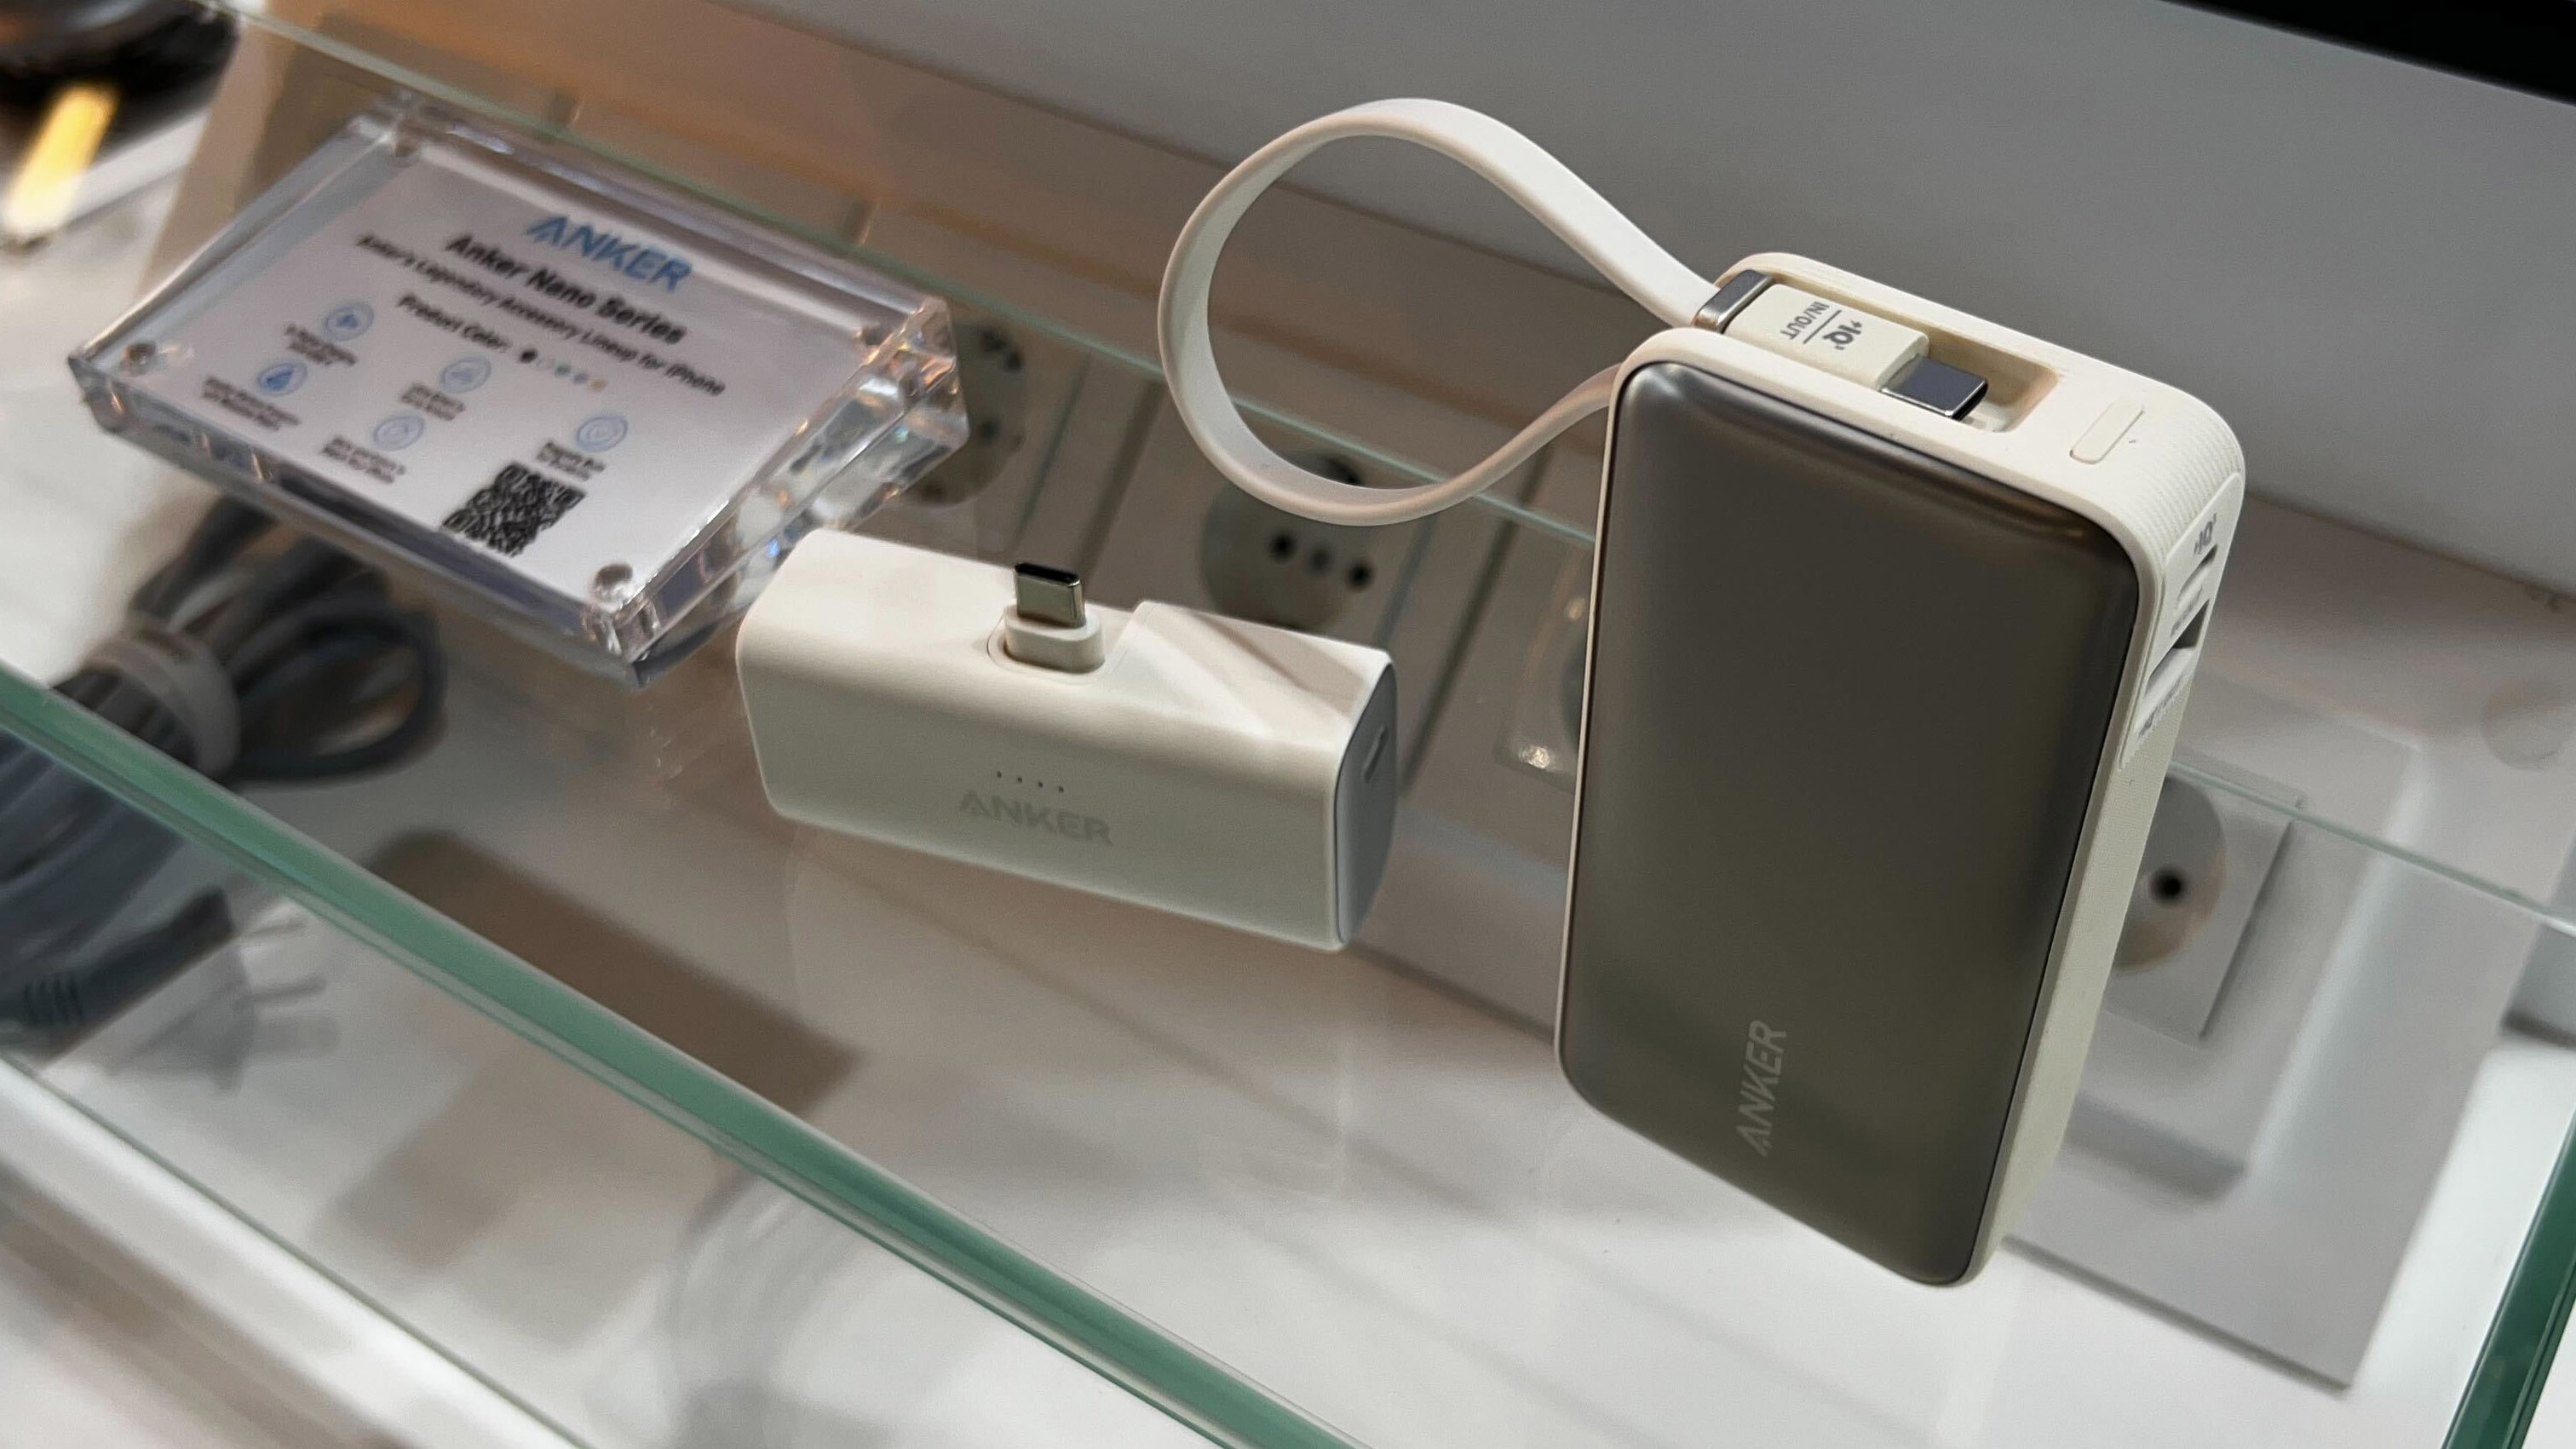 An Anker MagGo charger sitting on a glass table